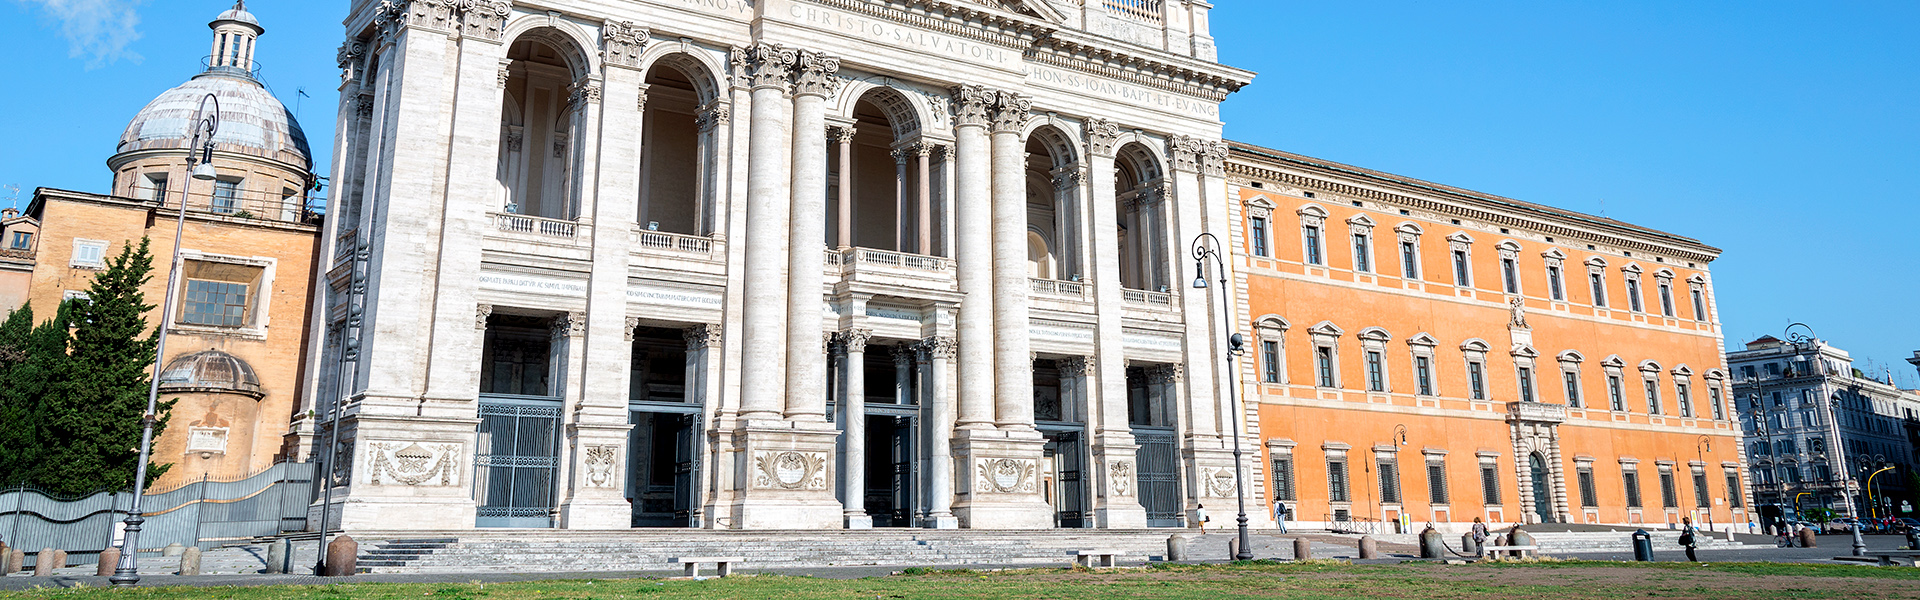 The Basilica of Saint John in the Lateran is the departure point for the Pilgrim's Way